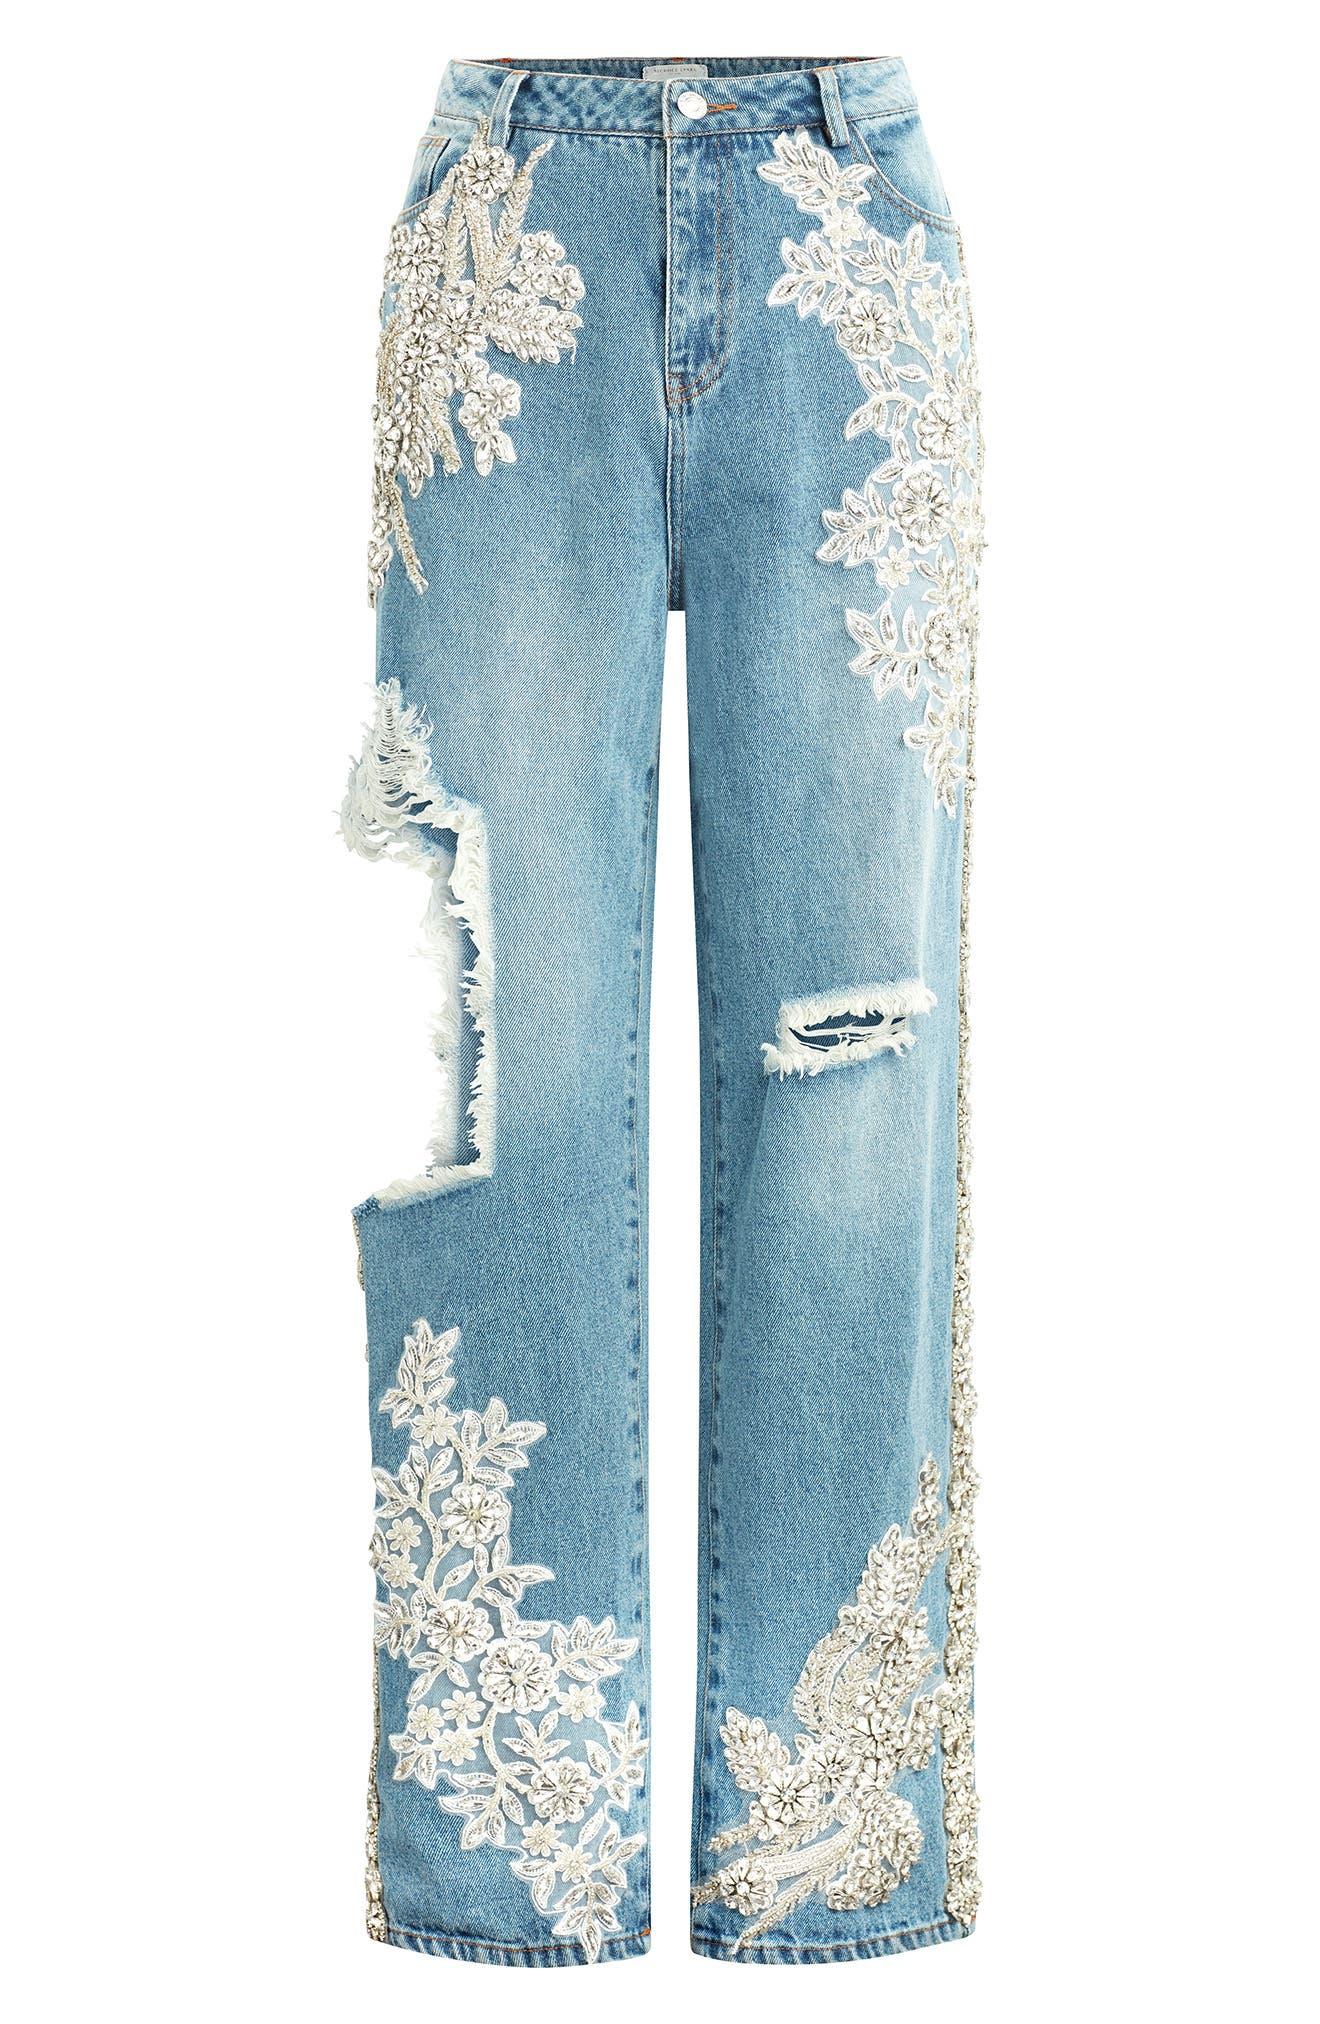 NICHOLE LYNEL THE LABEL Crystal Appliqué Ripped Nonstretch Jeans